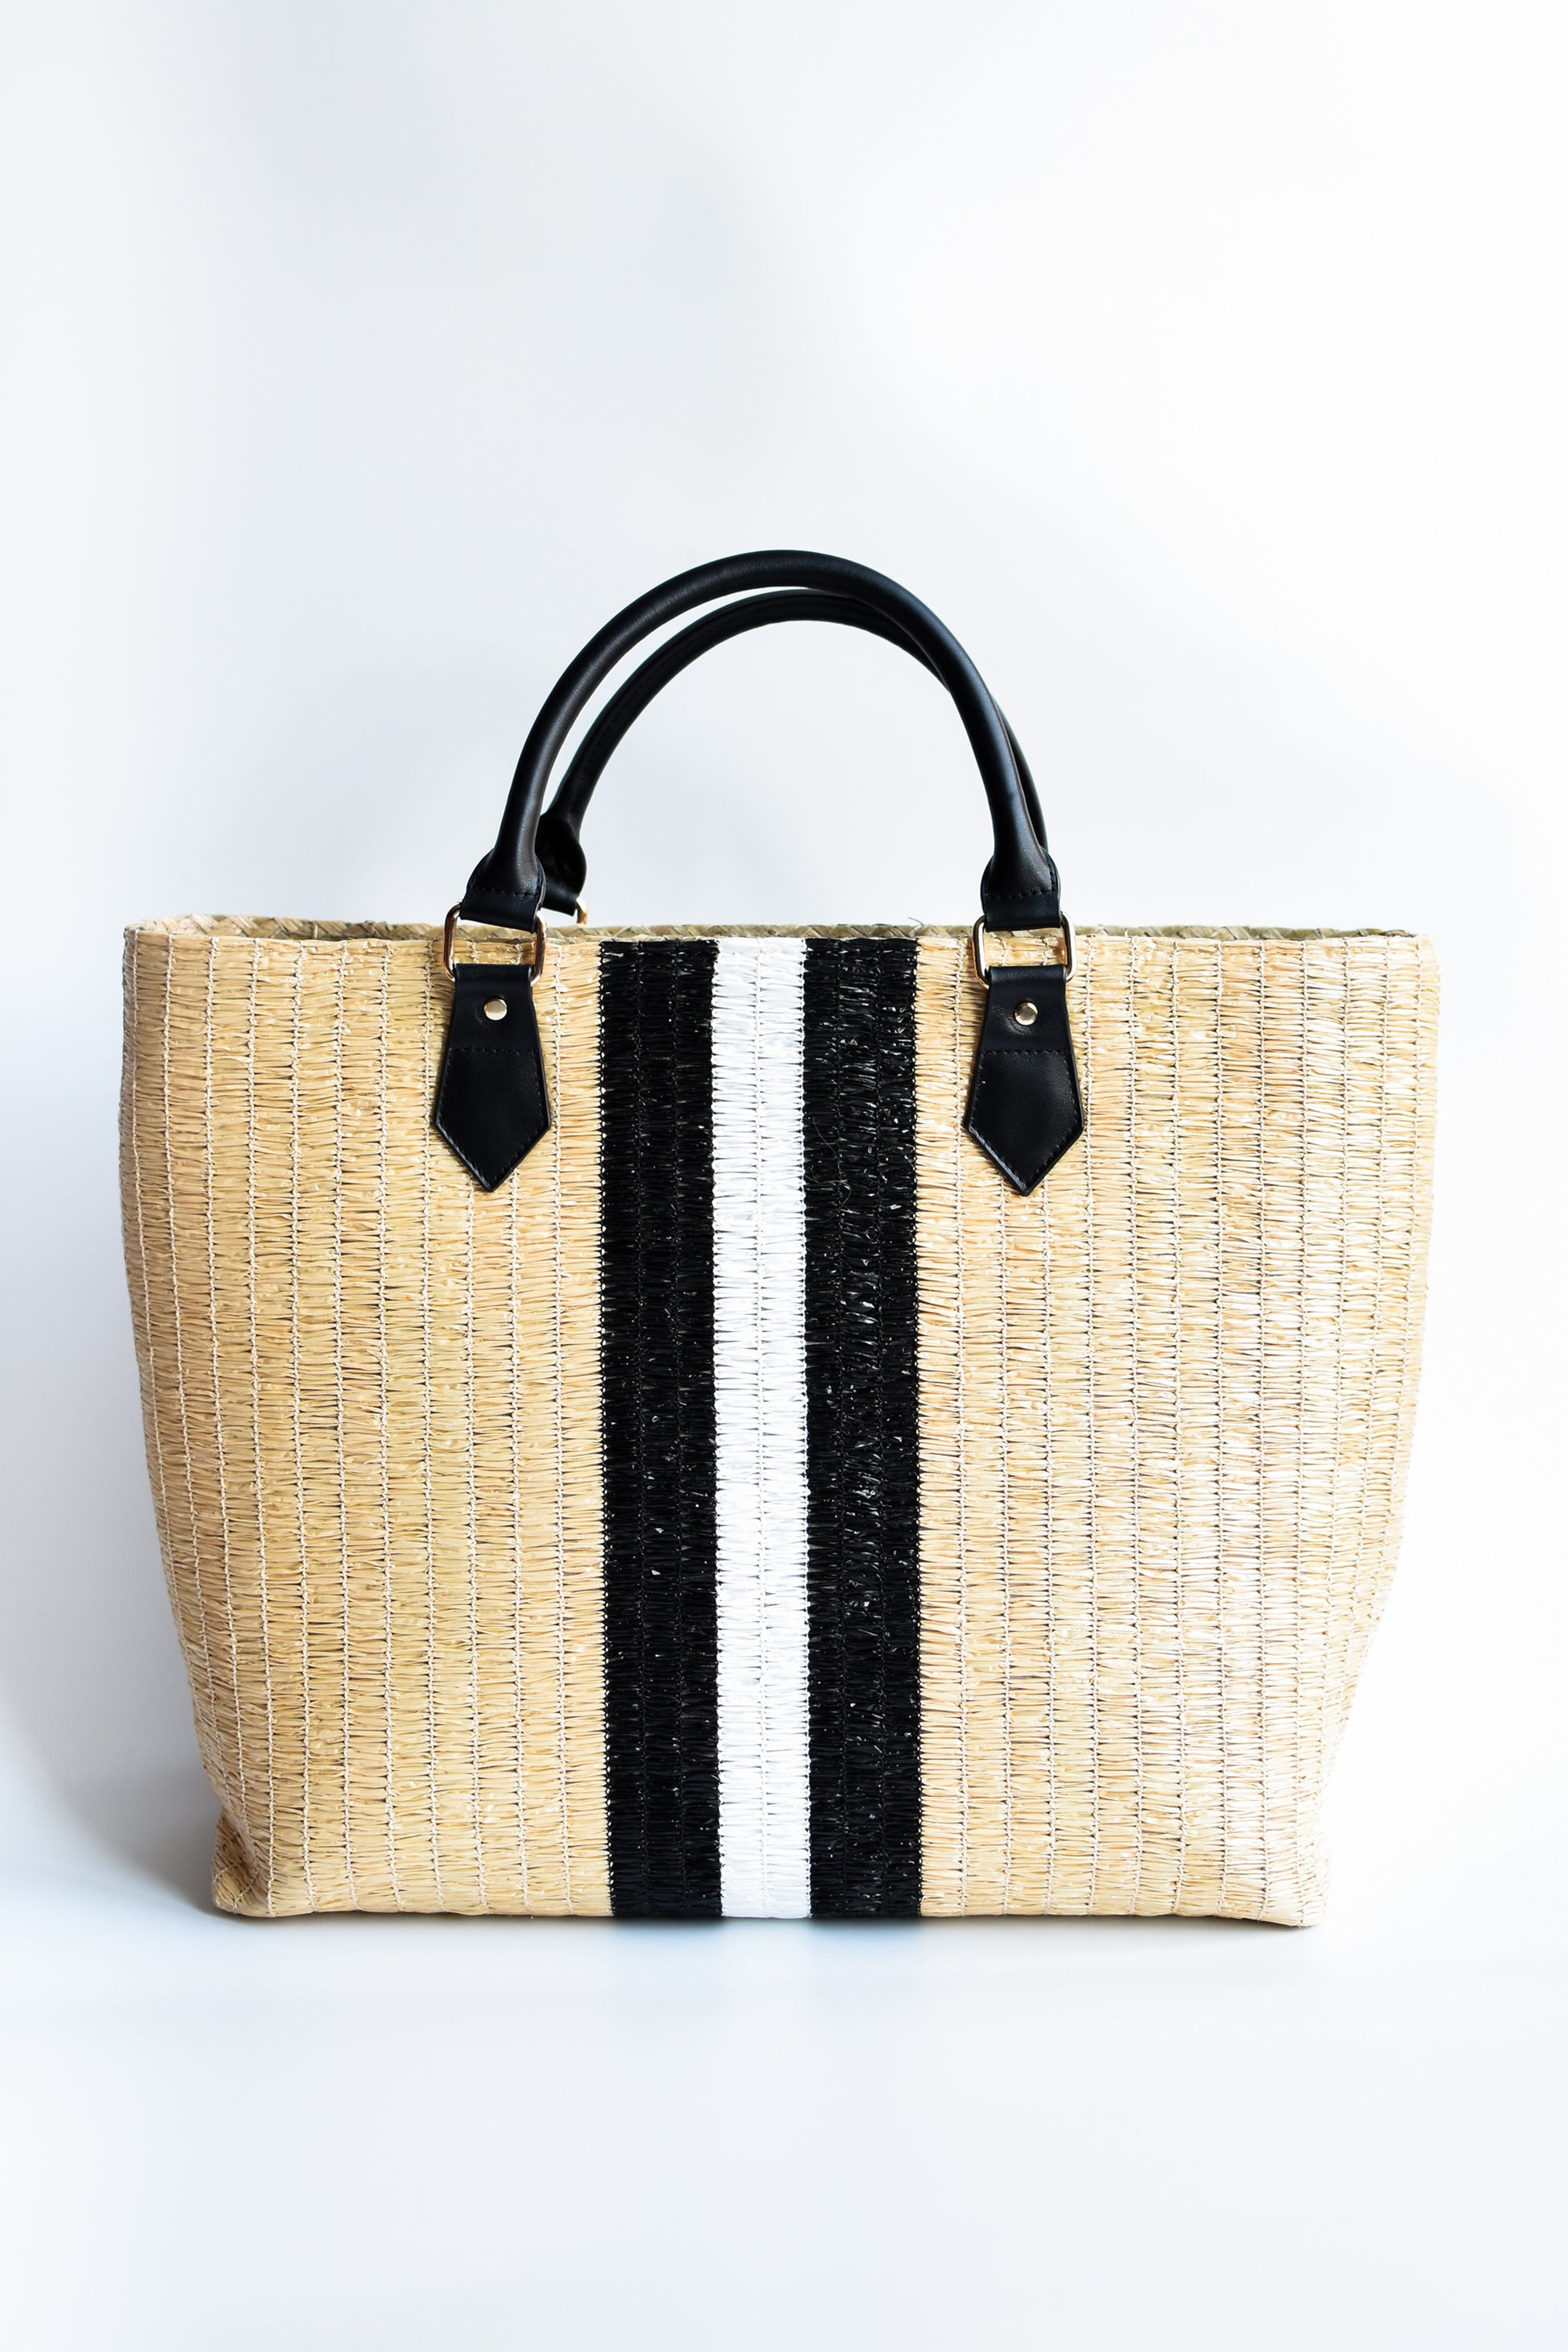 Benicia straw tote bag with black leather handles and black & white center stripe.